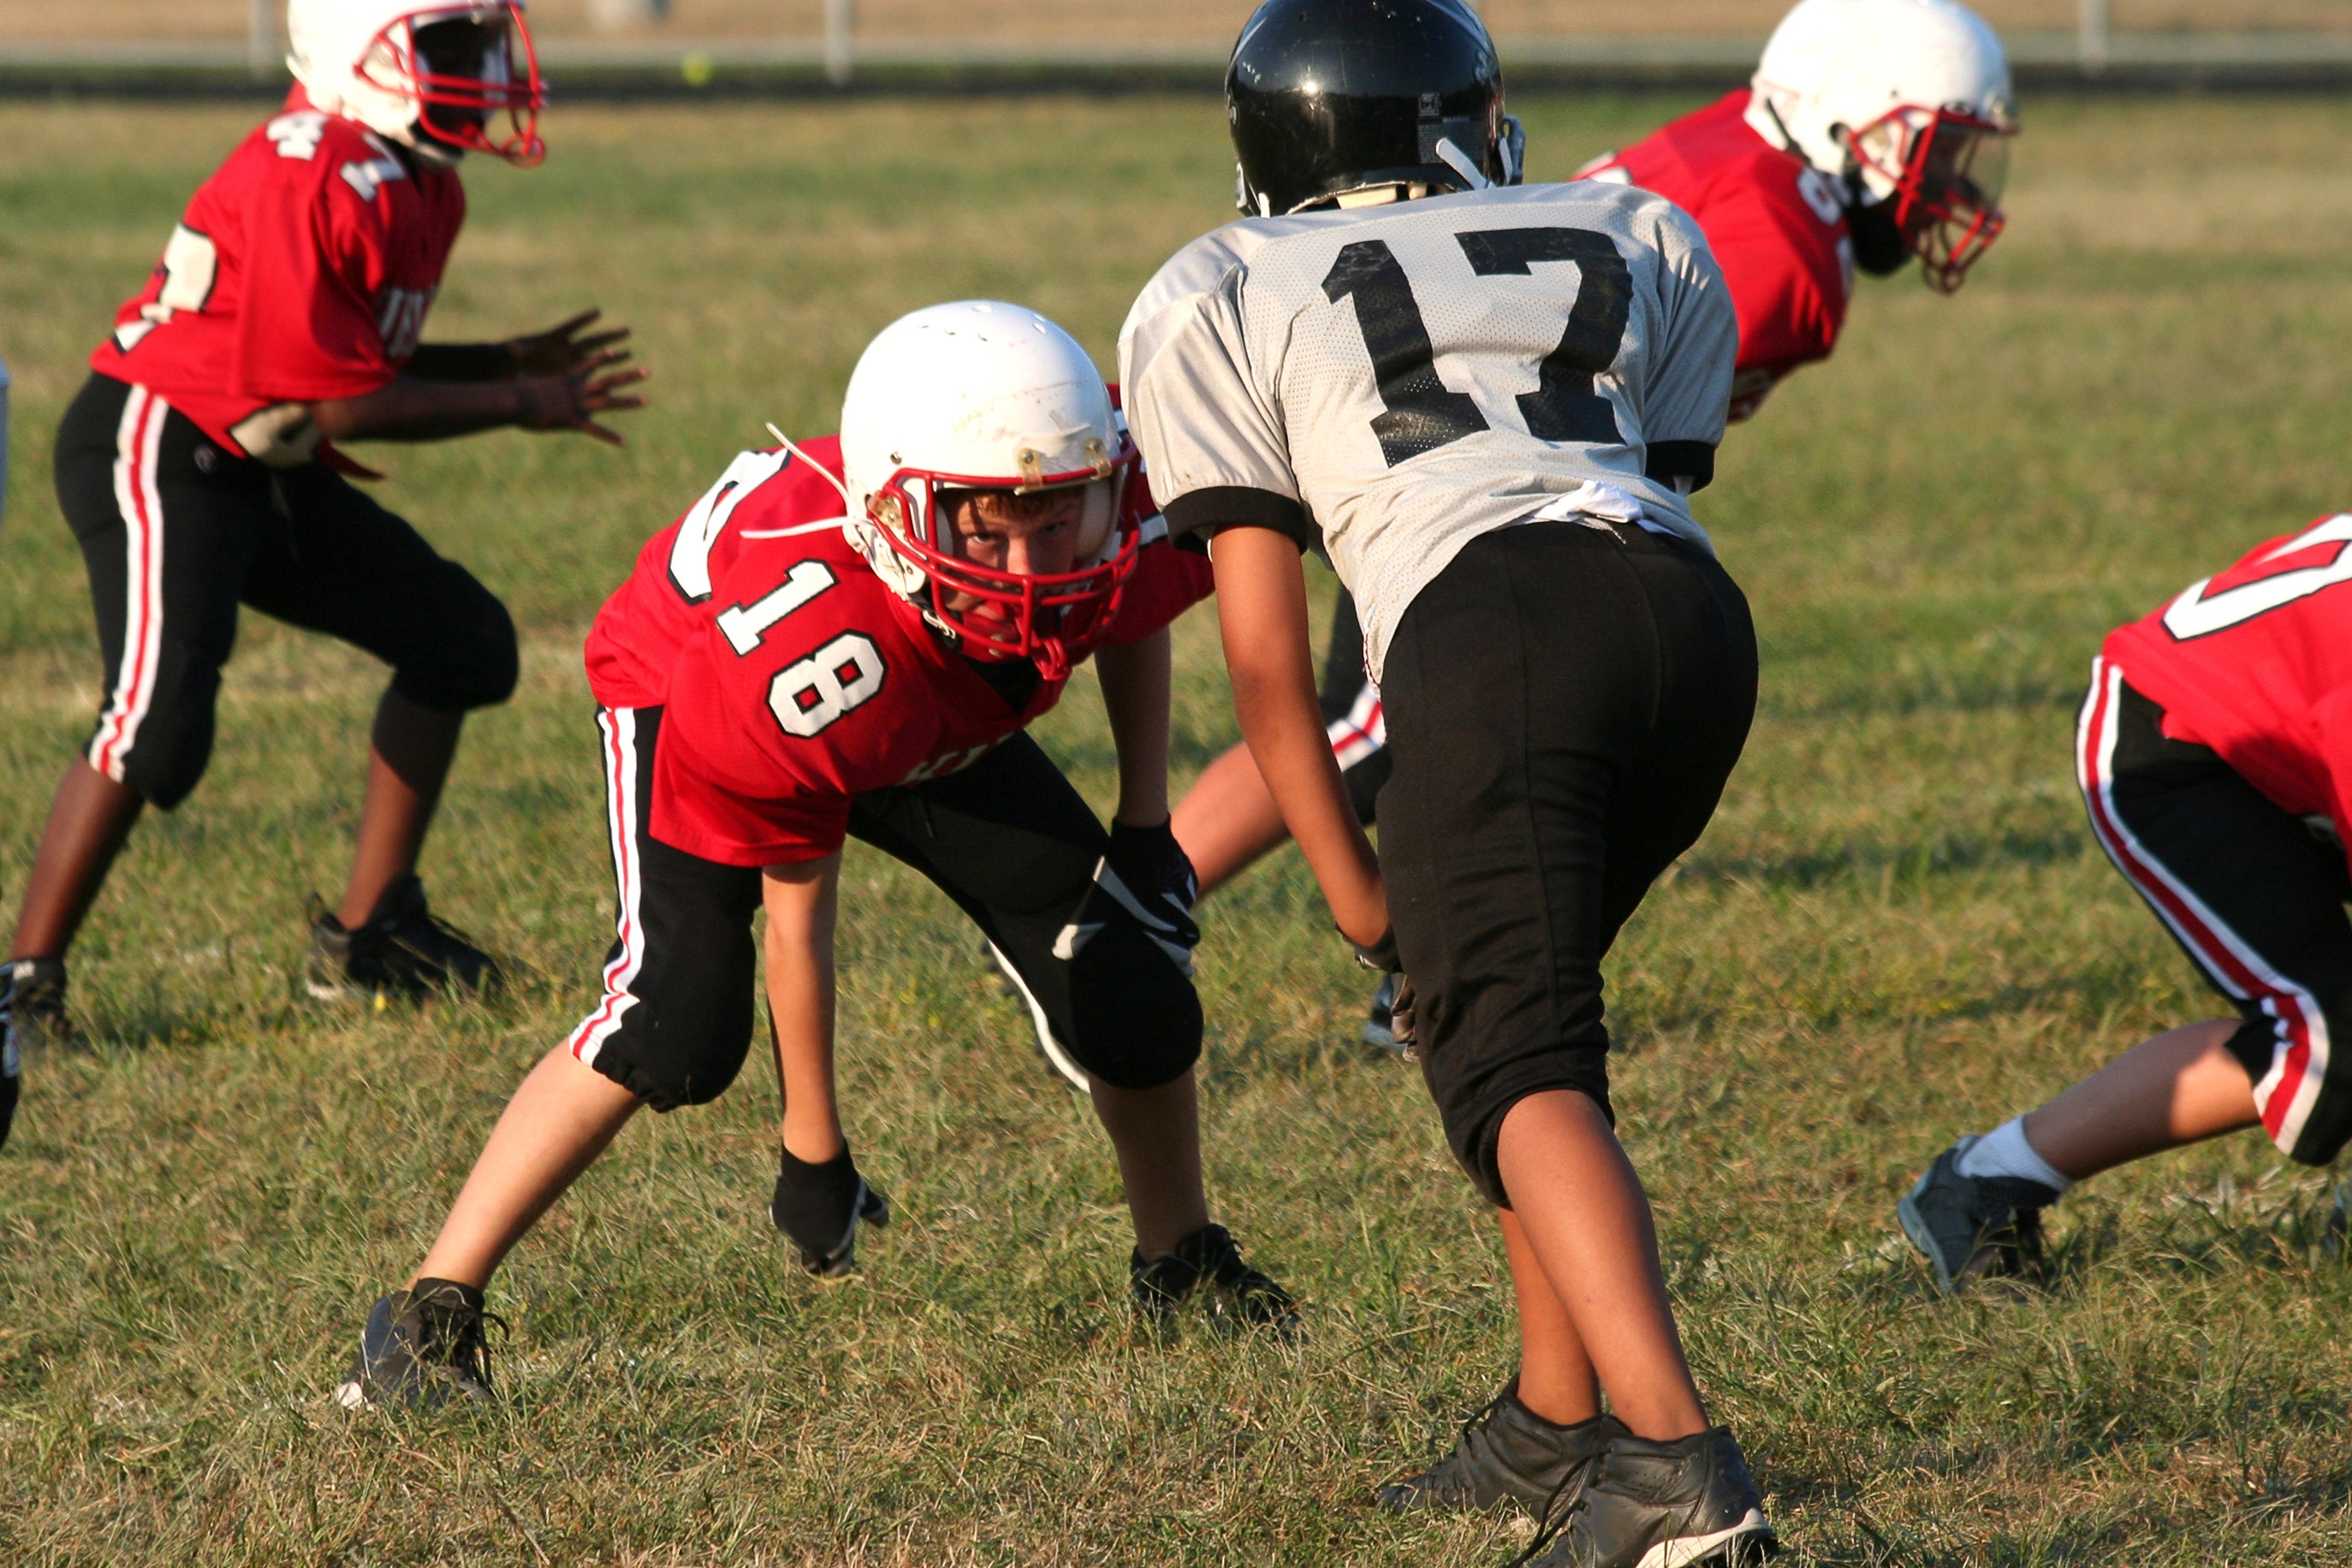 The biggest mistakes parents make when their kids play team sports